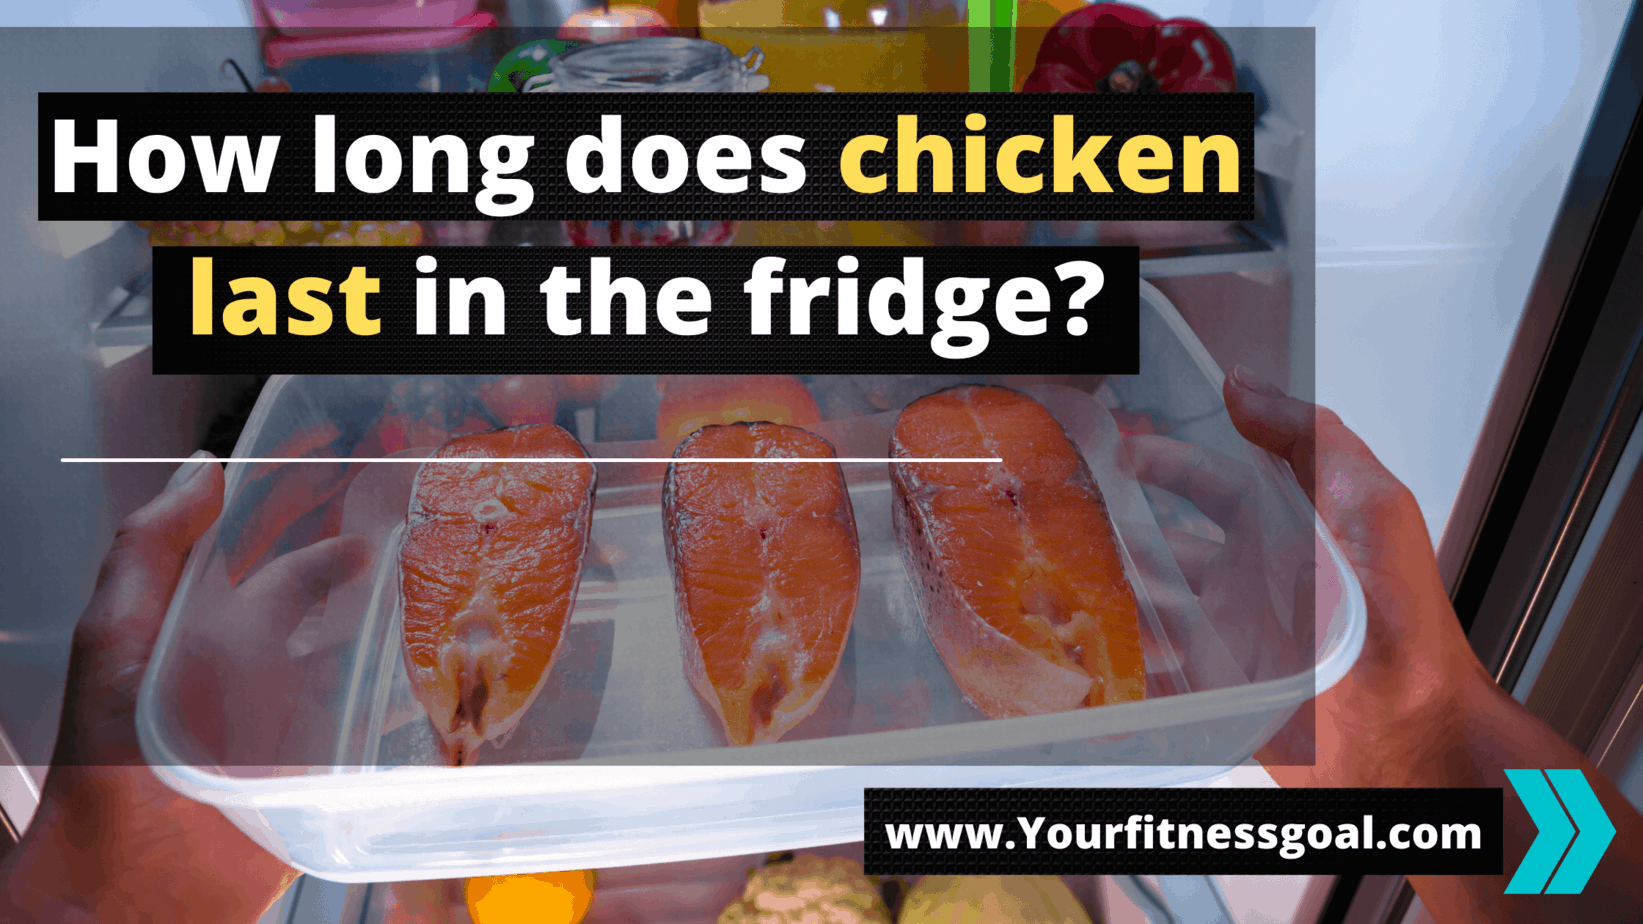 How long does chicken last in the fridge